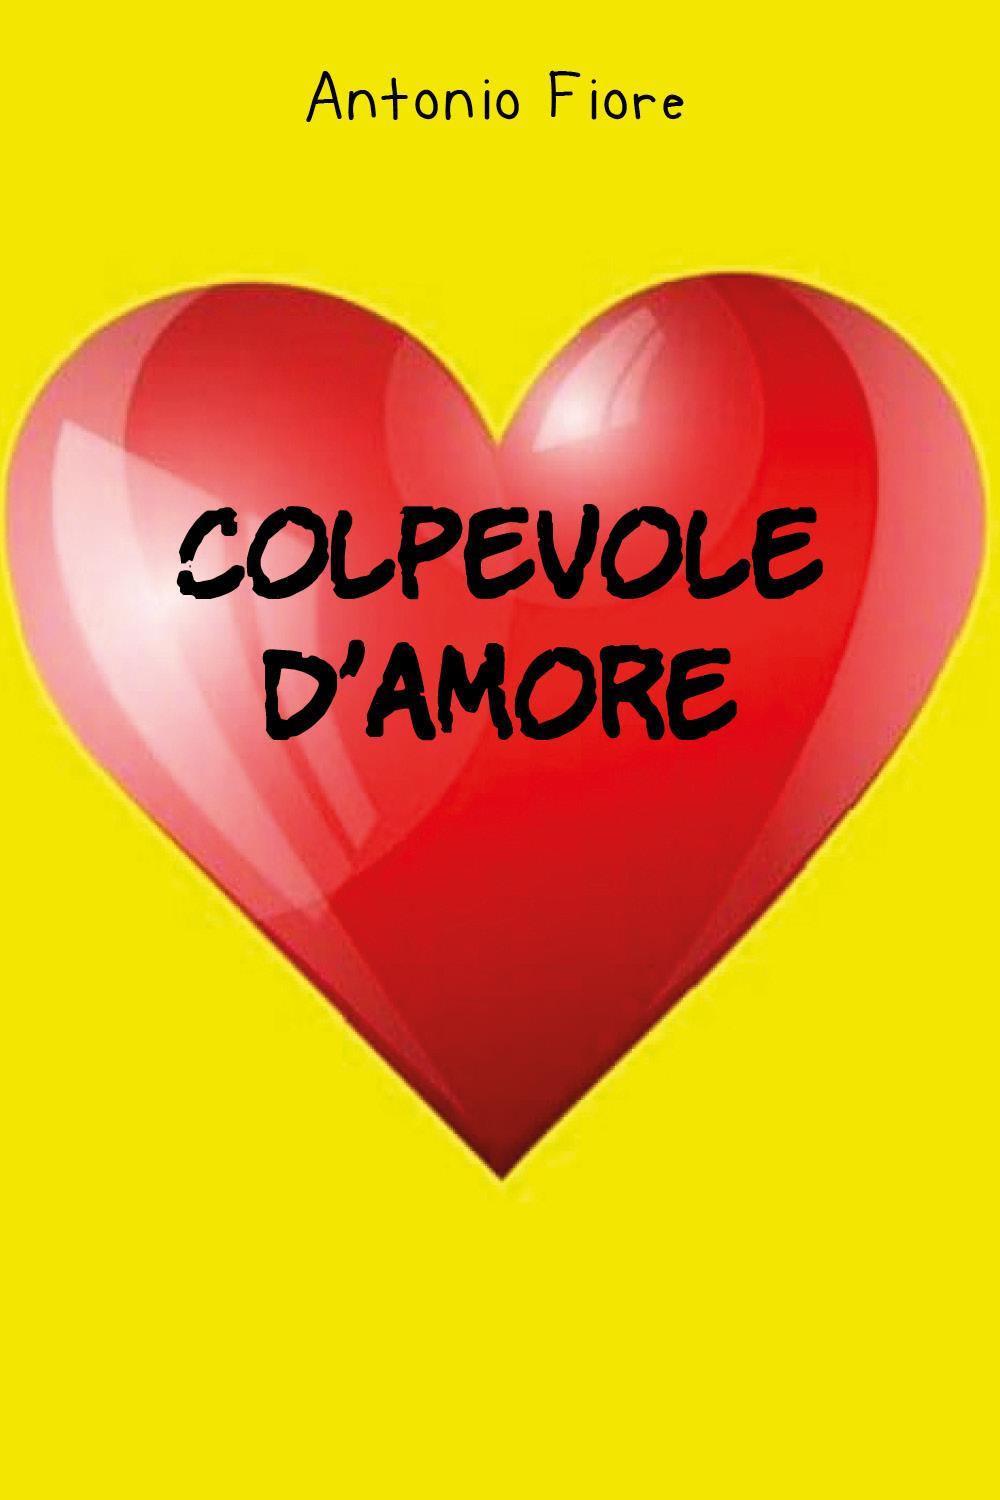 Colpevole d'amore